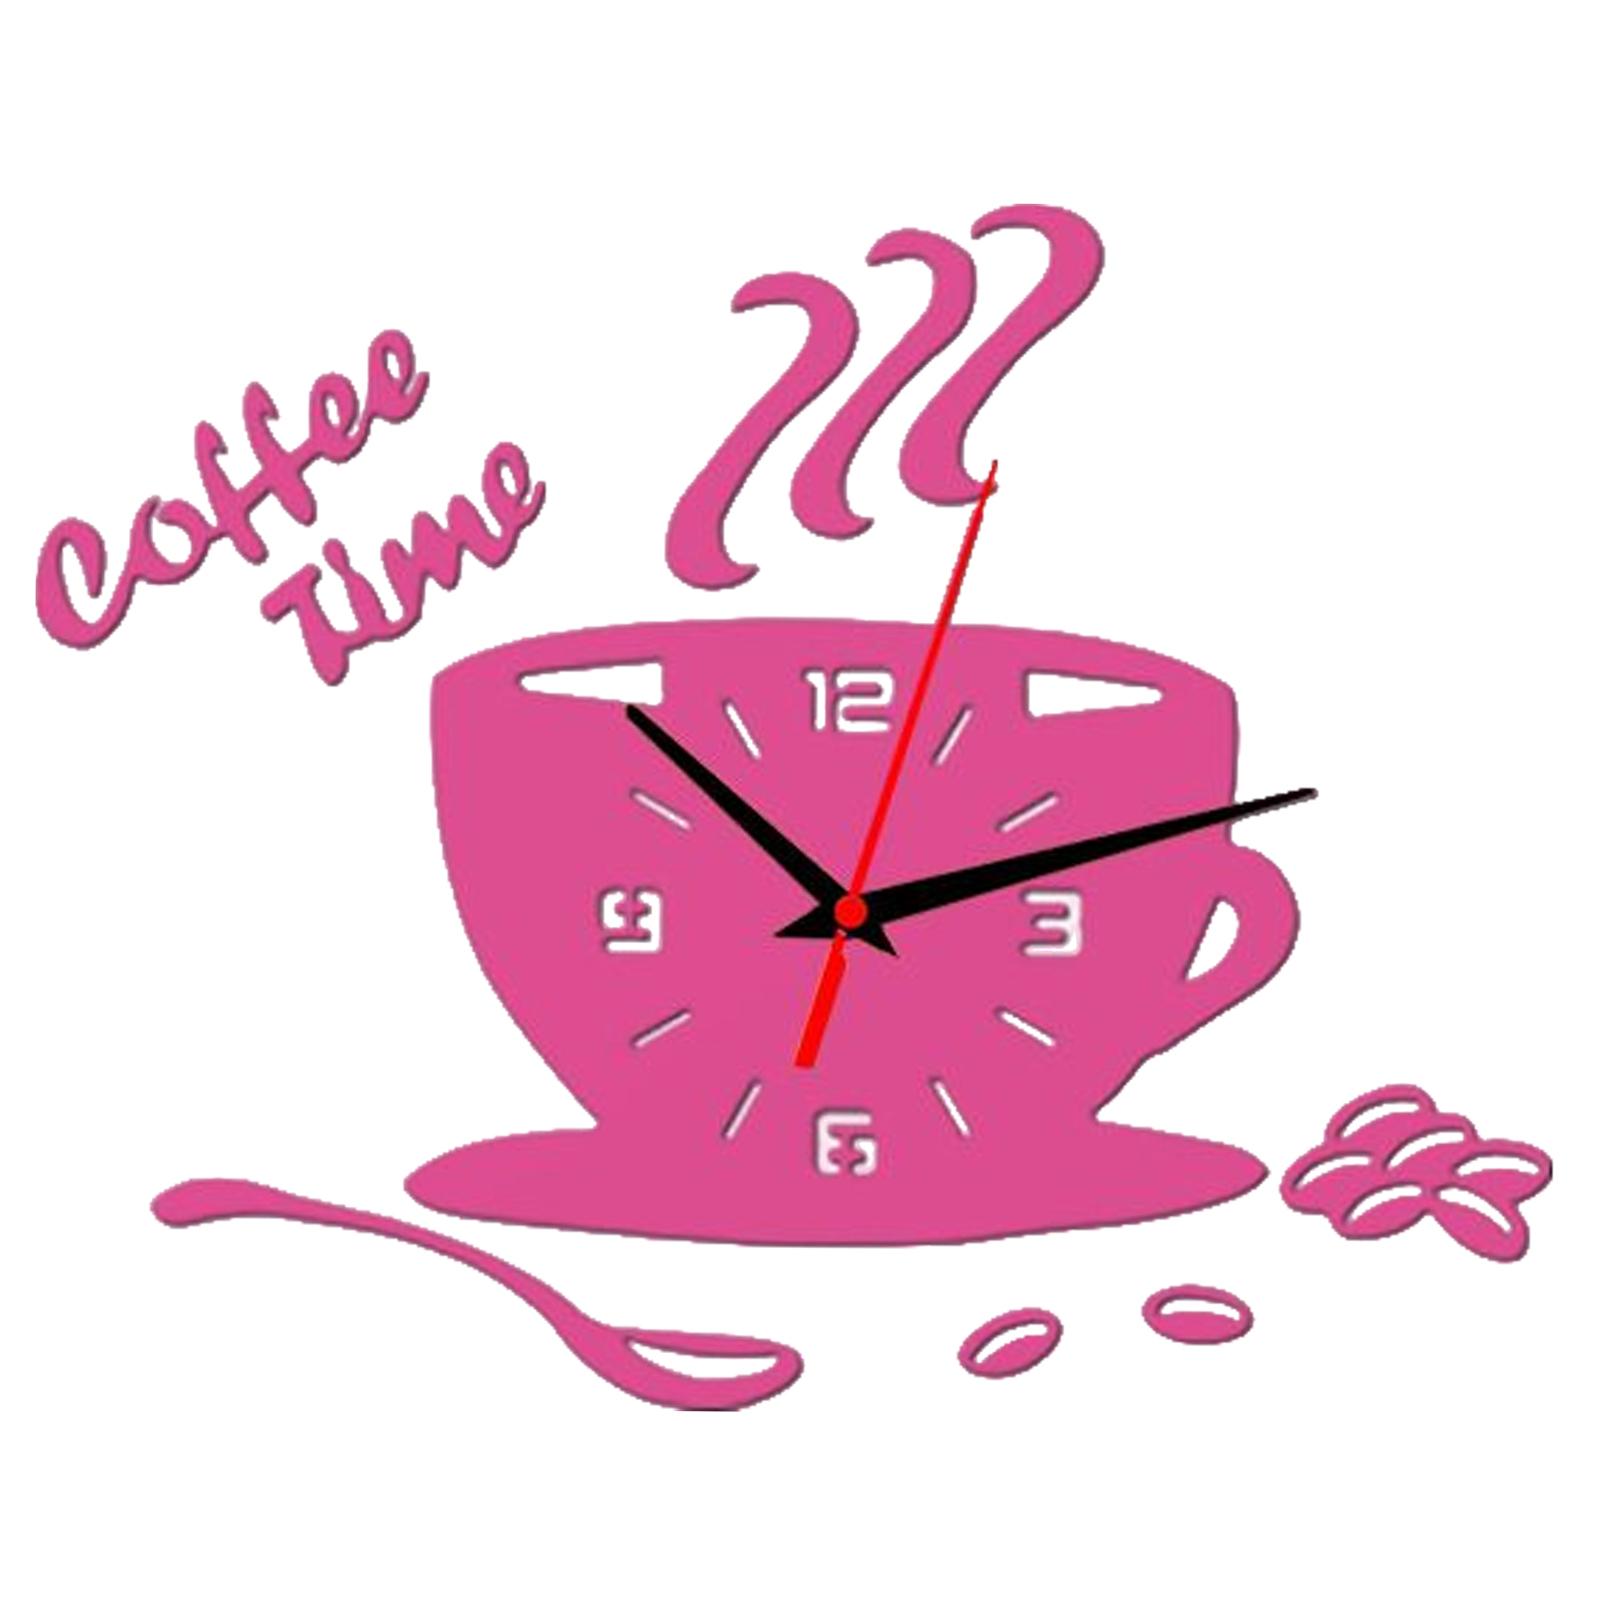 3D DIY Coffee Cup Wall Clock Watch Clocks Mirror for Office Decor pink